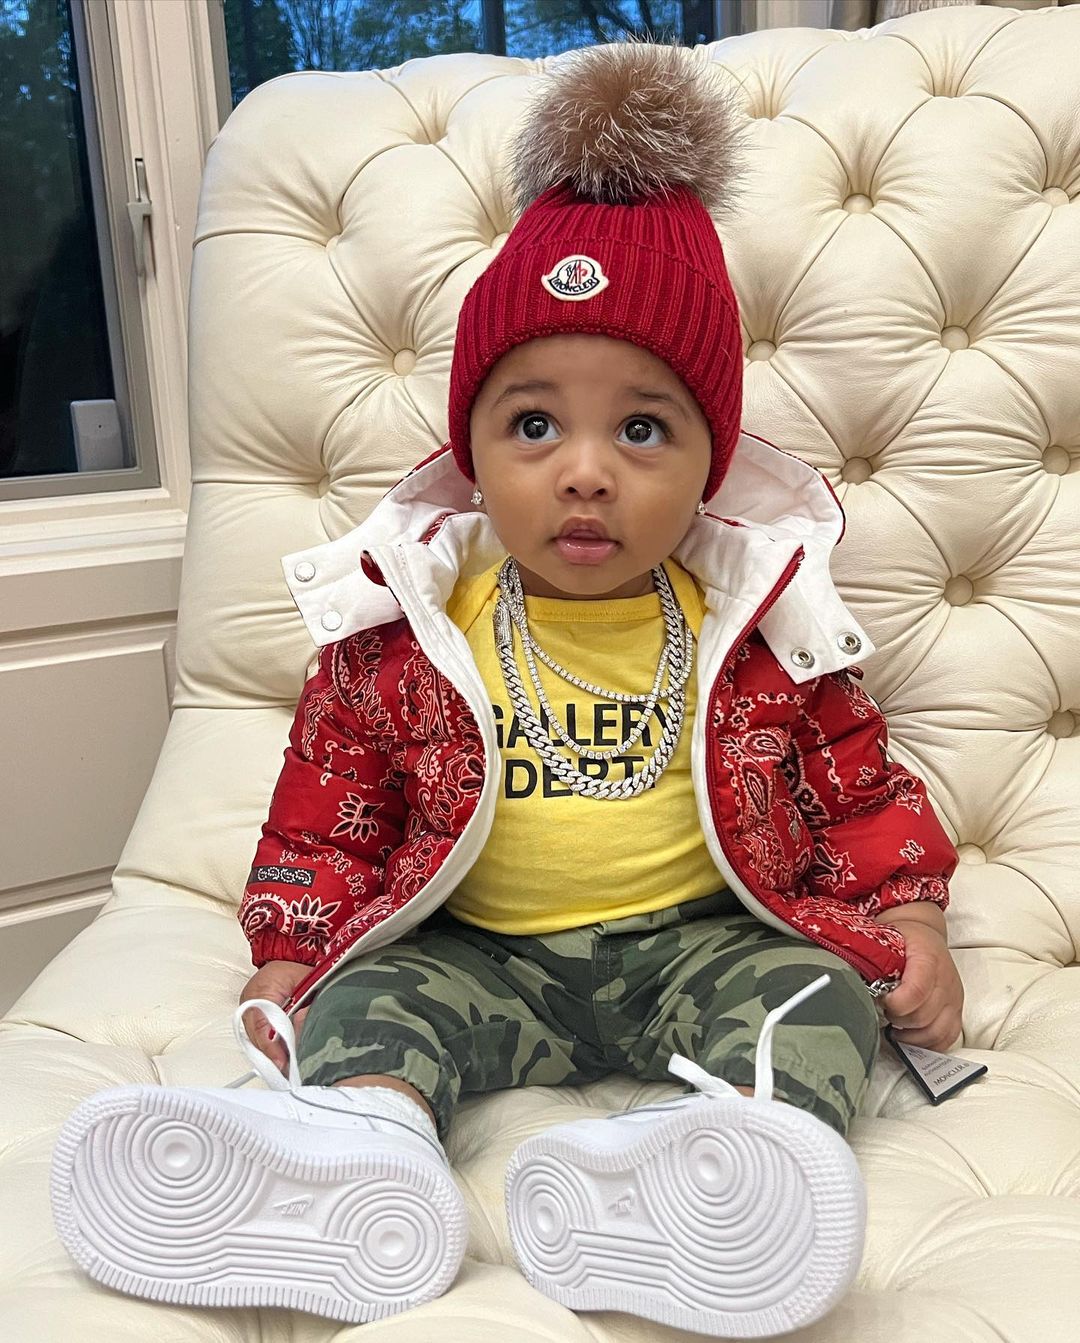 https://www.lifeandstylemag.com/wp-content/uploads/2022/05/cardi-b-kids2.jpg?fit=800%2C995&quality=86&strip=all